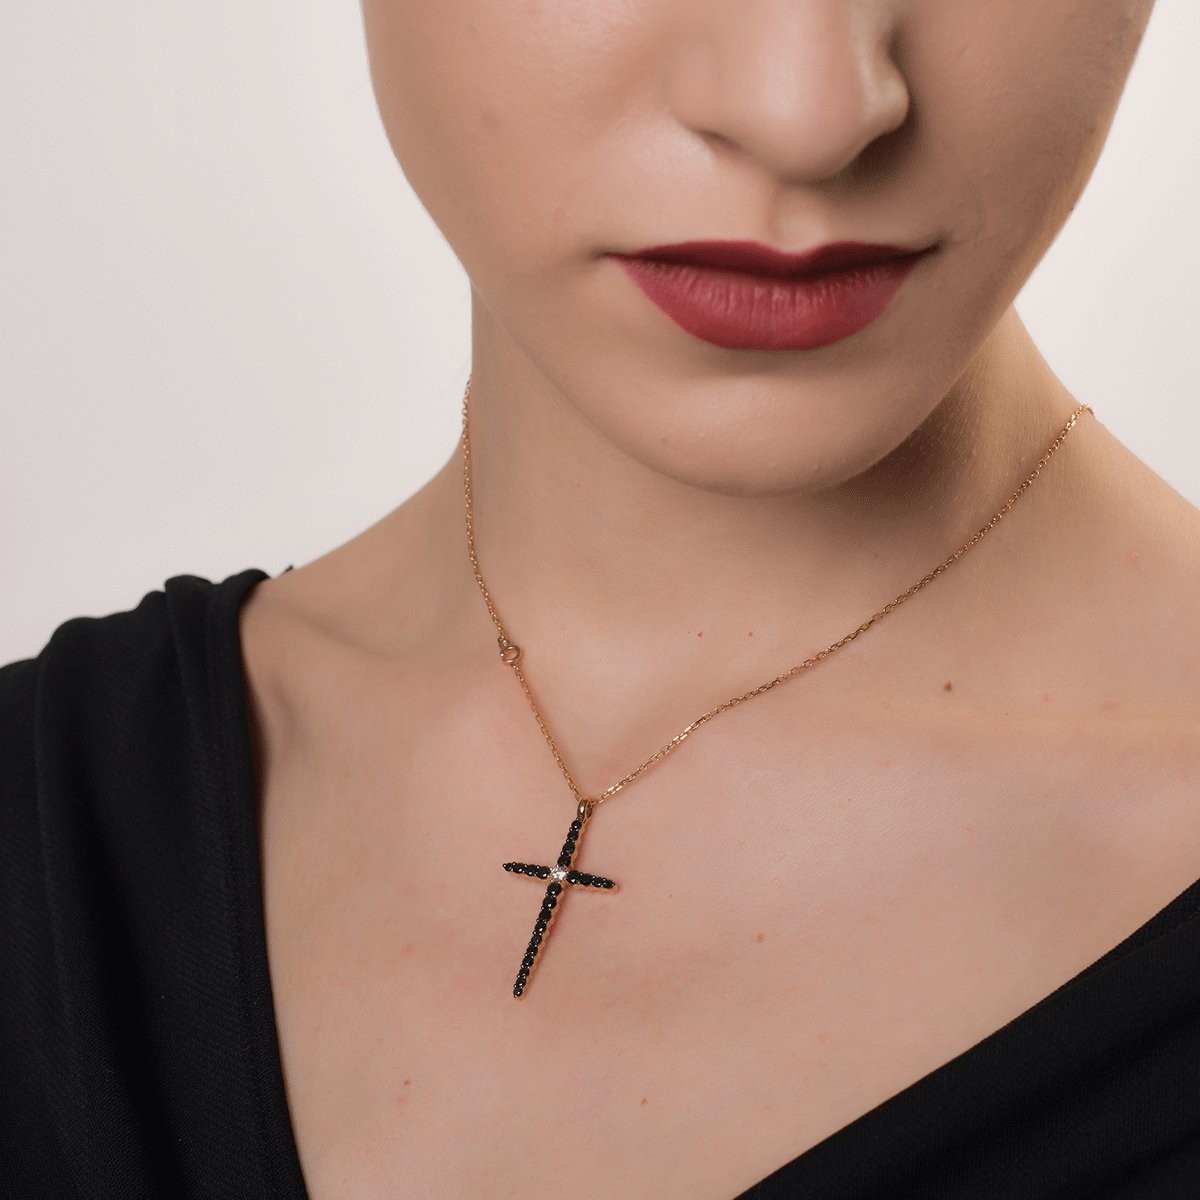 18K rose gold cross pendant necklace with 0.11ct clear diamonds and 0.94ct black diamonds